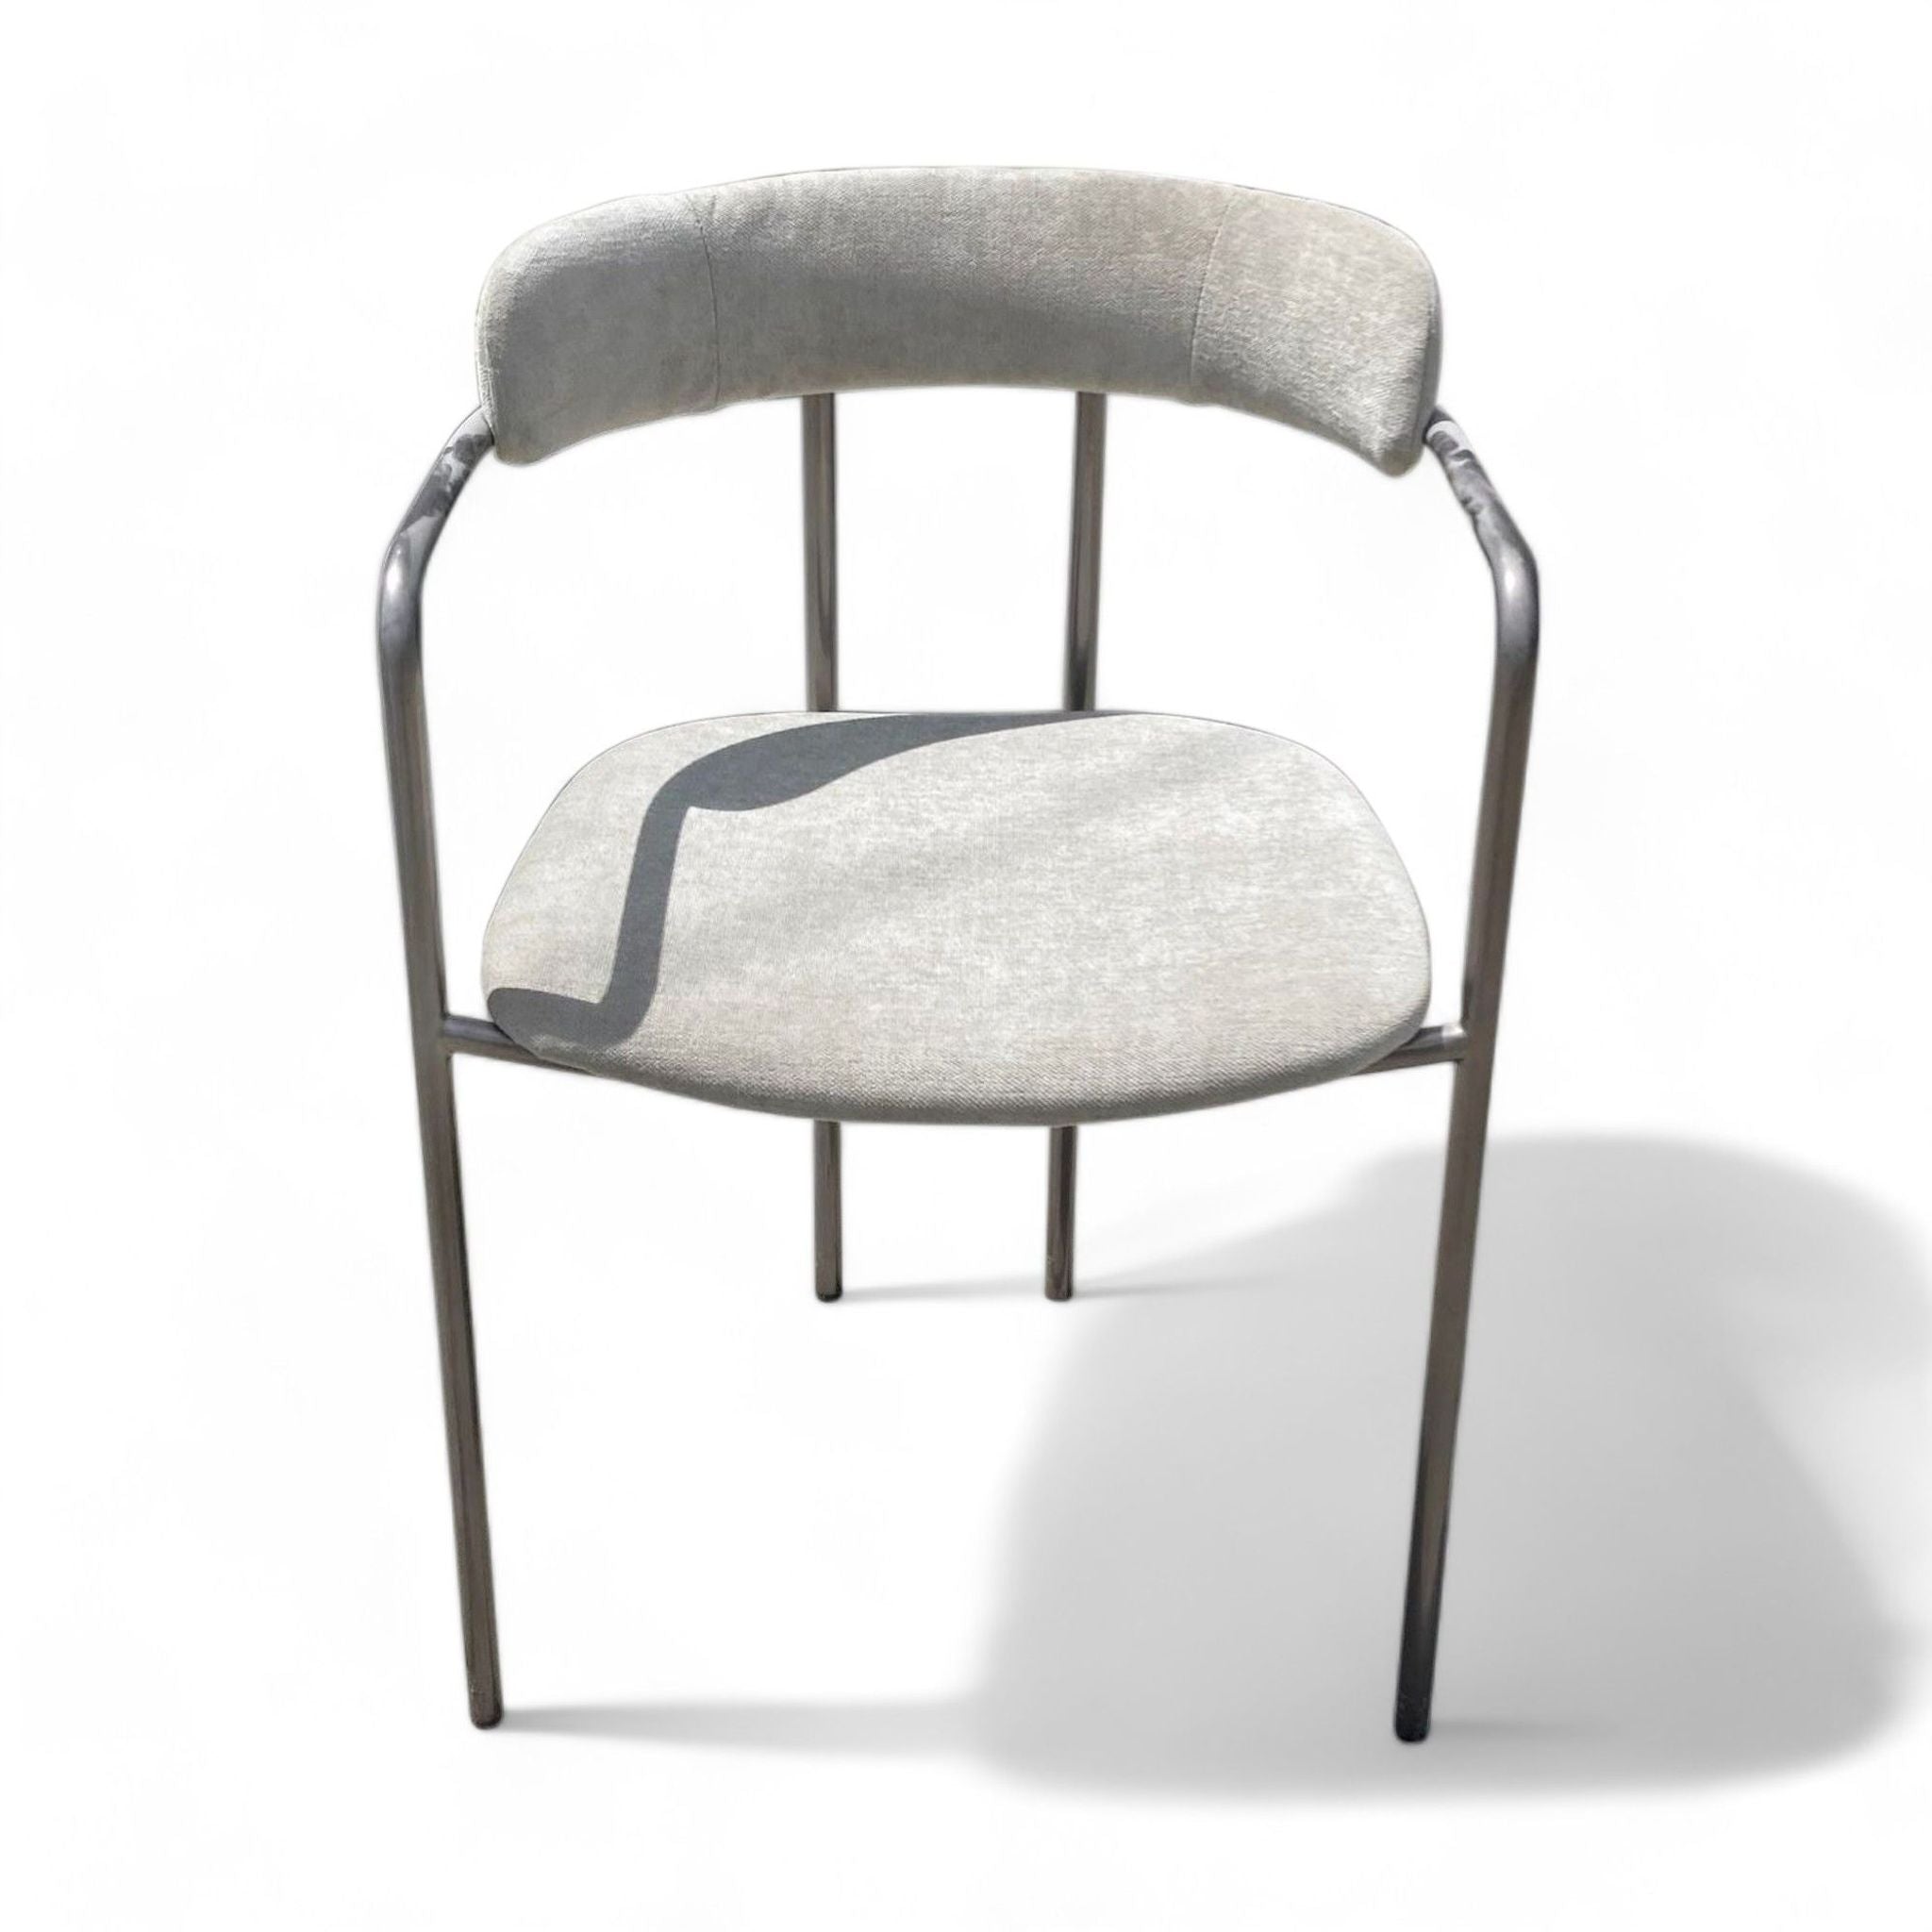 West Elm Lenox dining chair with curved steel frame and light grey upholstered seat and back, elegant design suitable for dining areas.